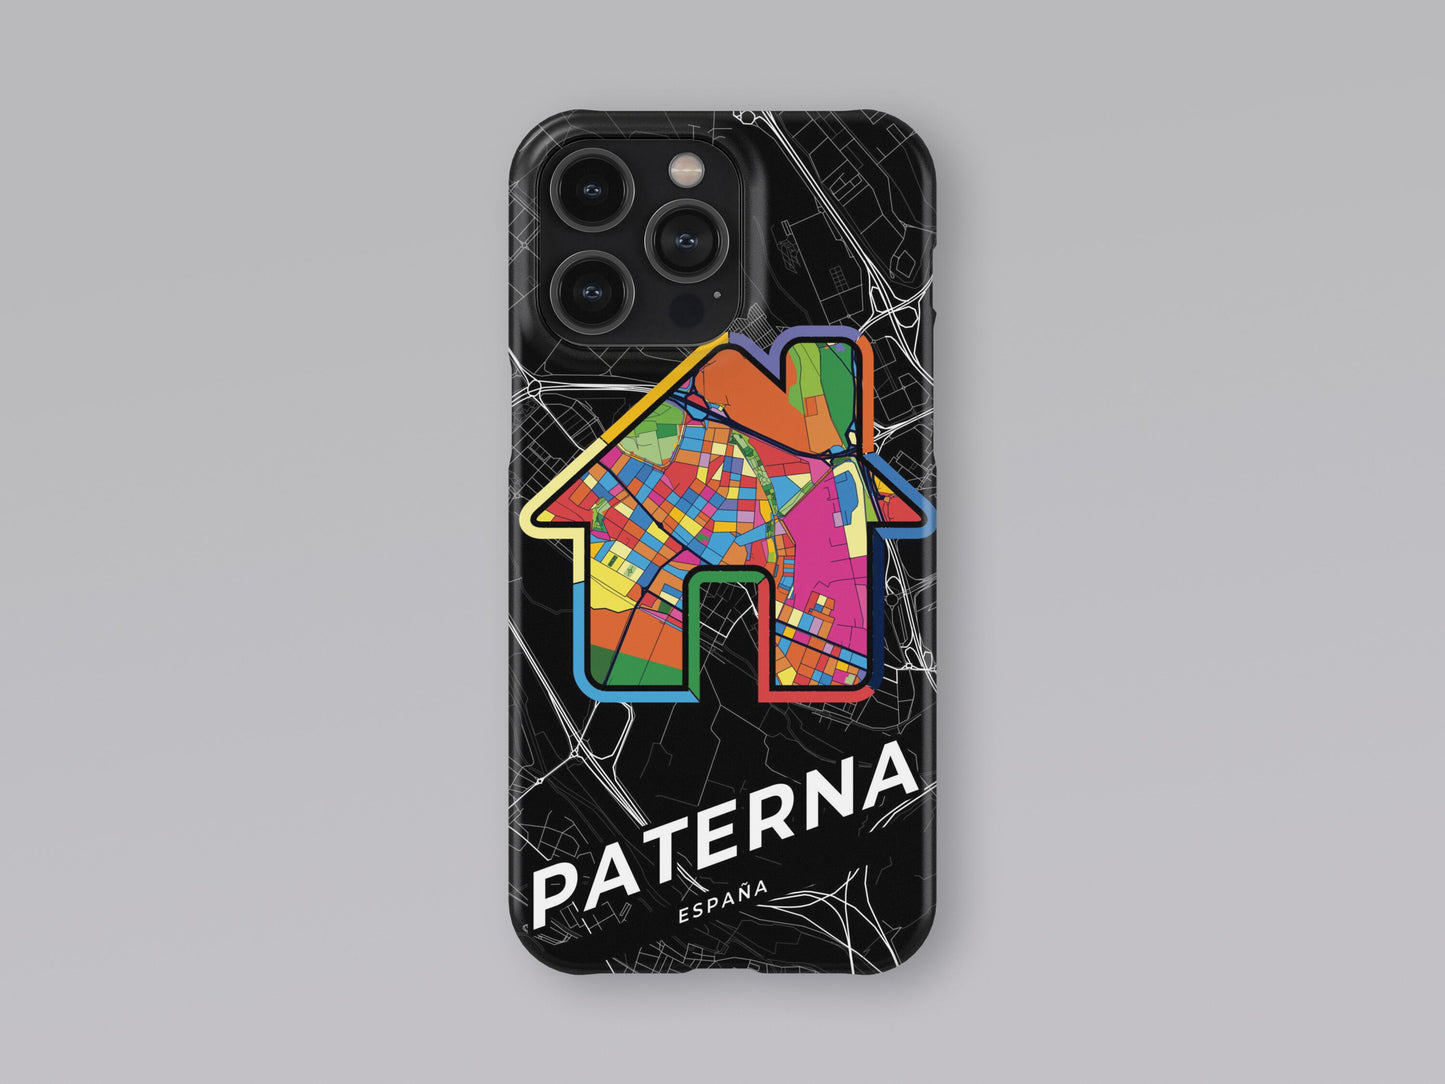 Paterna Spain slim phone case with colorful icon 3